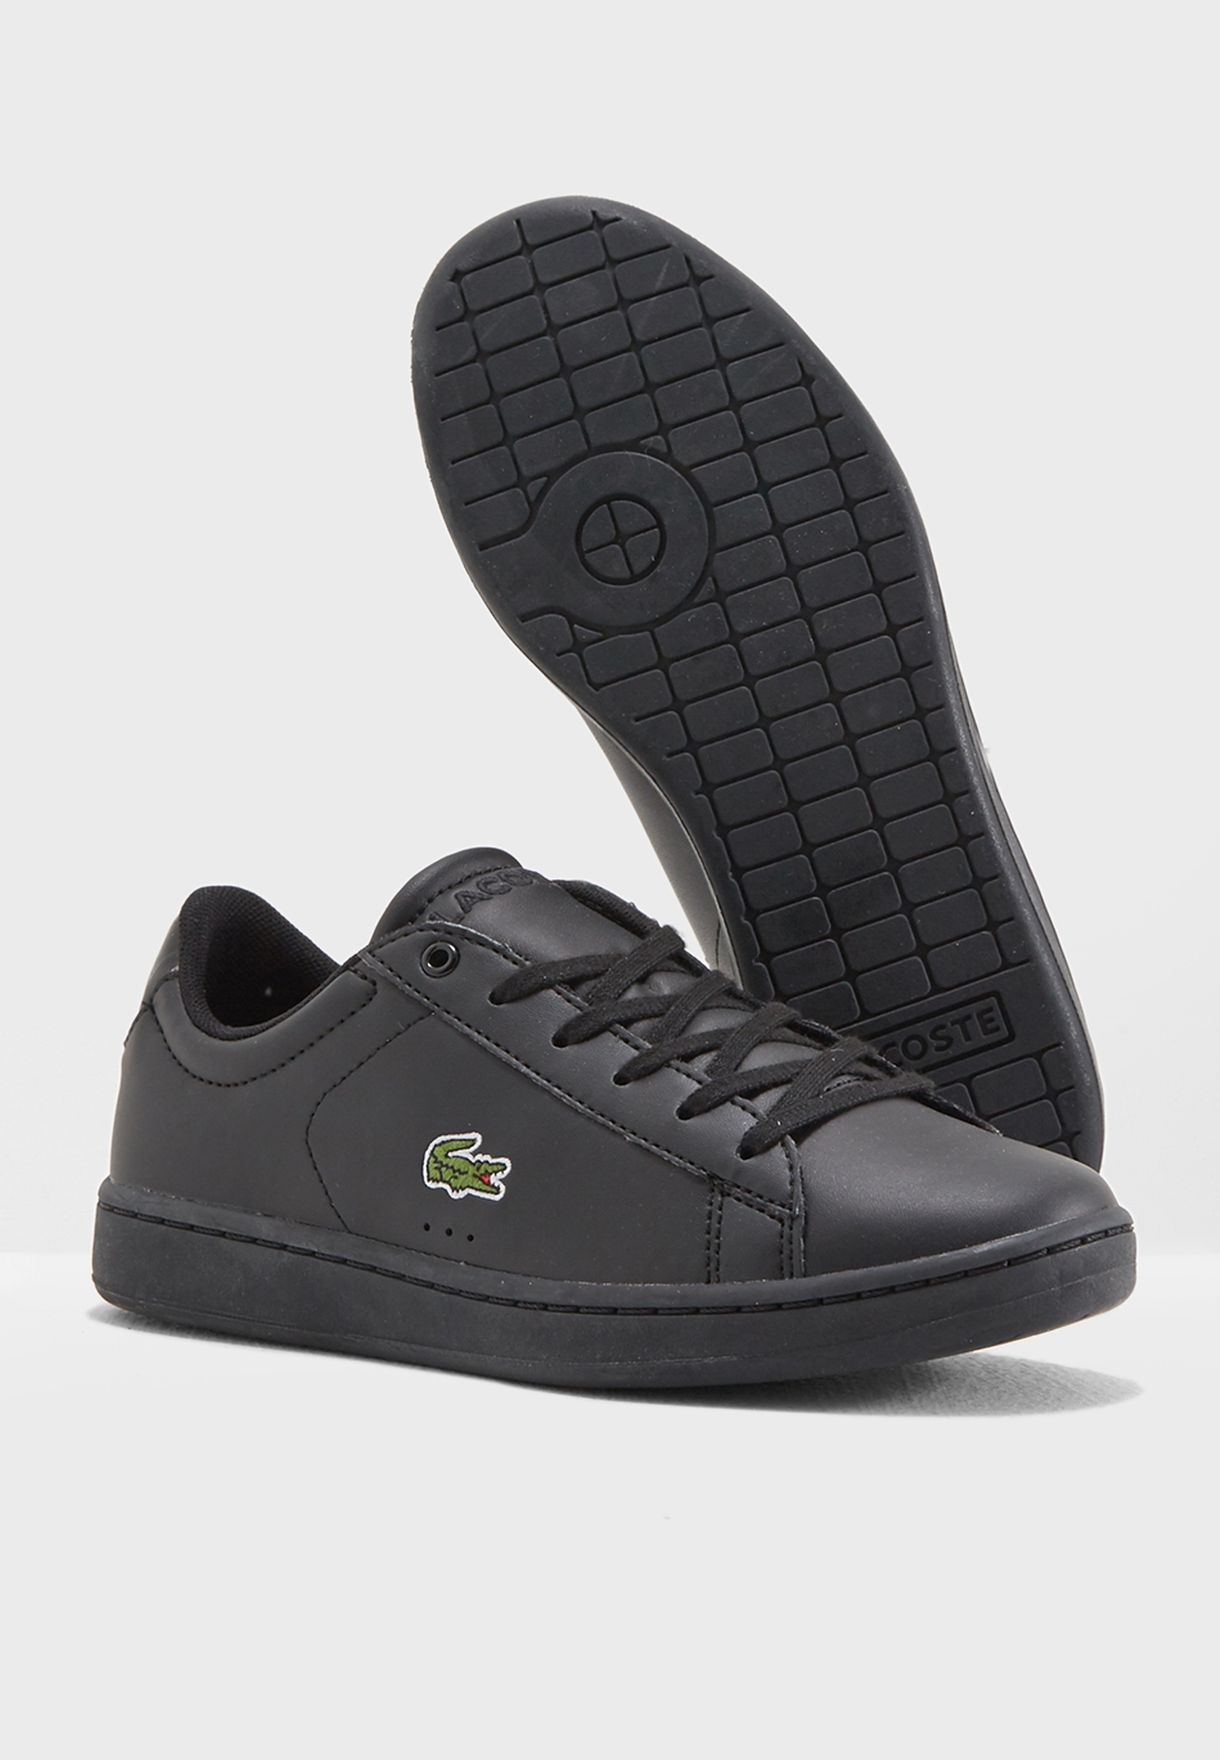 Lacoste Carnaby Evo 118 Black Trainers Shoes Kids Infant Junior Boys Girls New